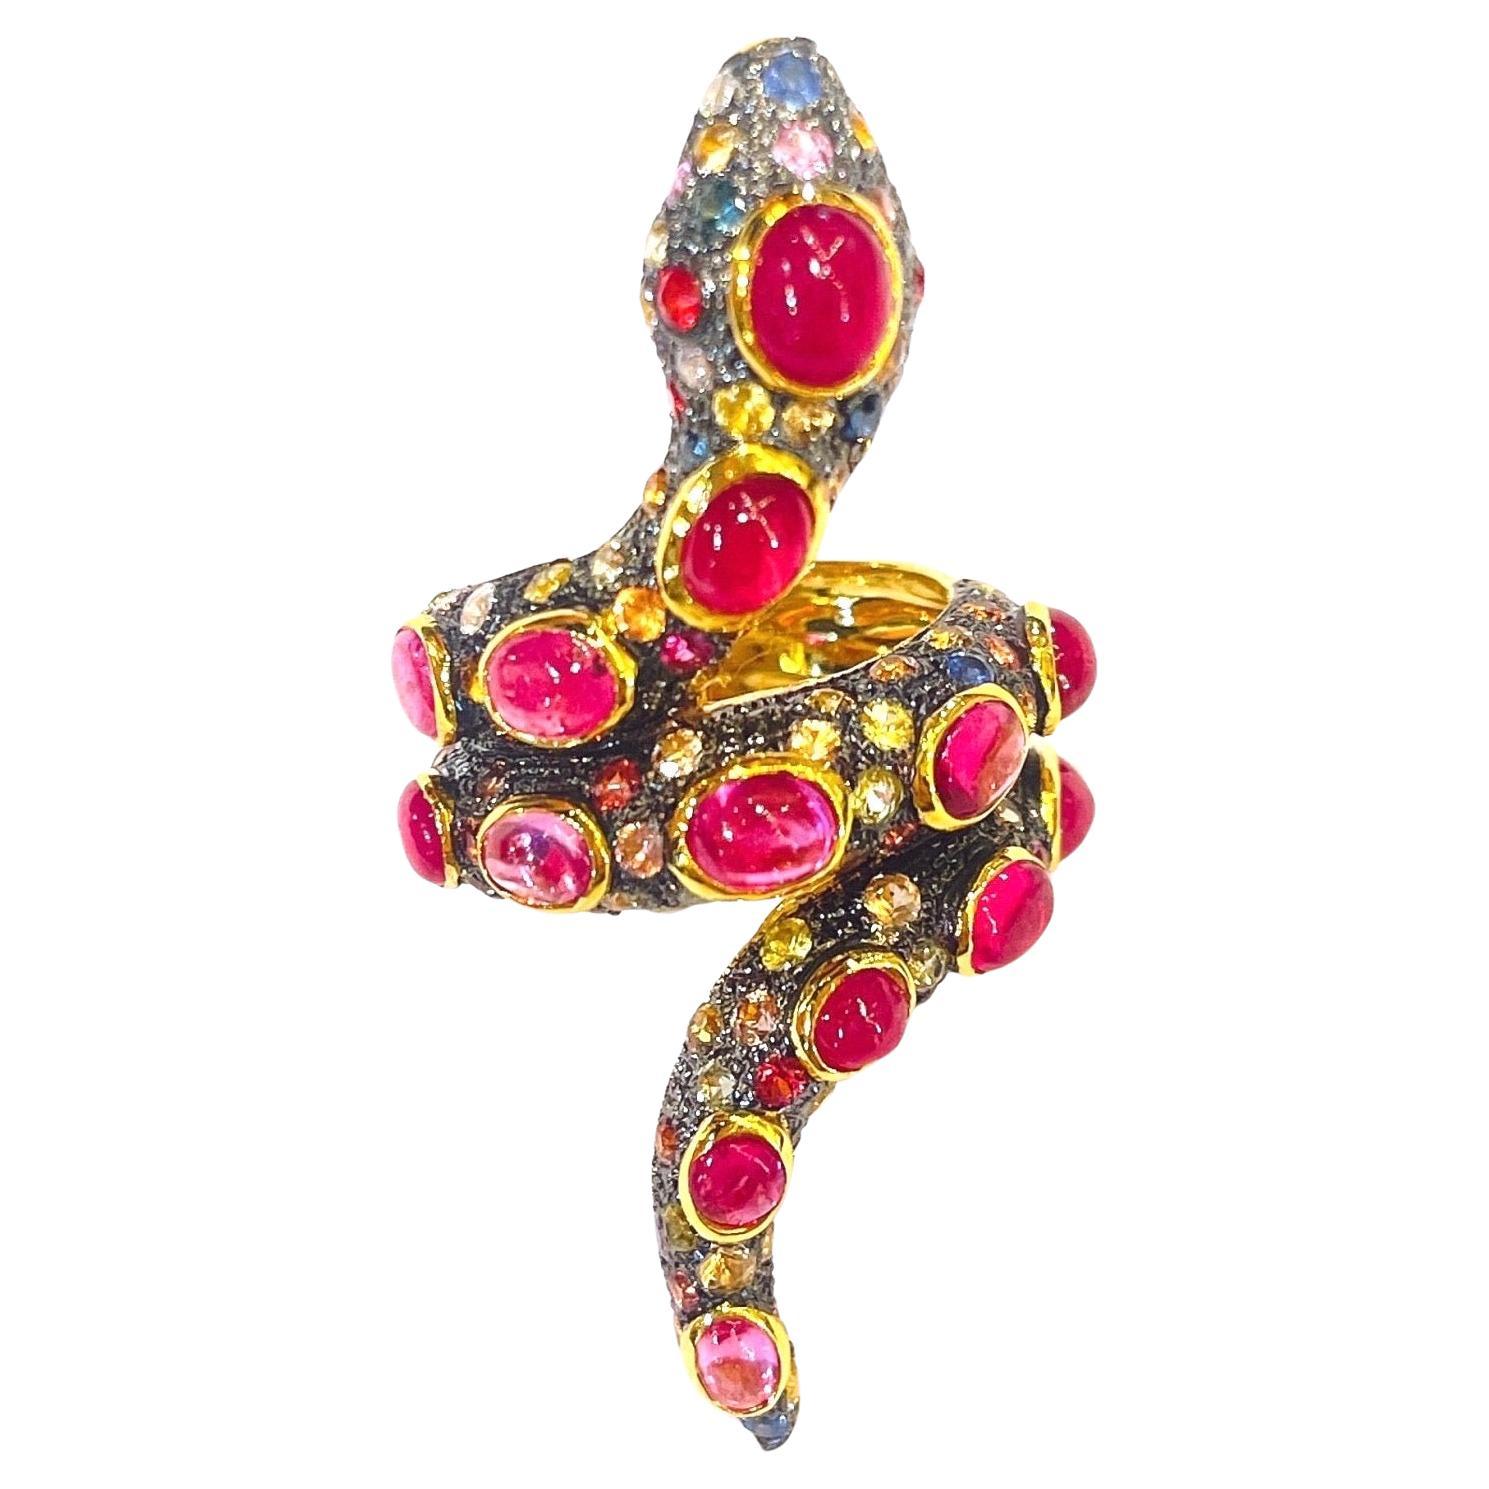 Bochic Serpent Ruby Ring & Fancy Sapphires
Real Natural Ruby Cabochons - 5 carat 
Natural Fancy color sapphires,  yellow, blue, pink and green
From Sri Lanka - 3 carats 
Black Silver & 22k Pink Gold Plating 
Comes with a Bochic Box
You will steal